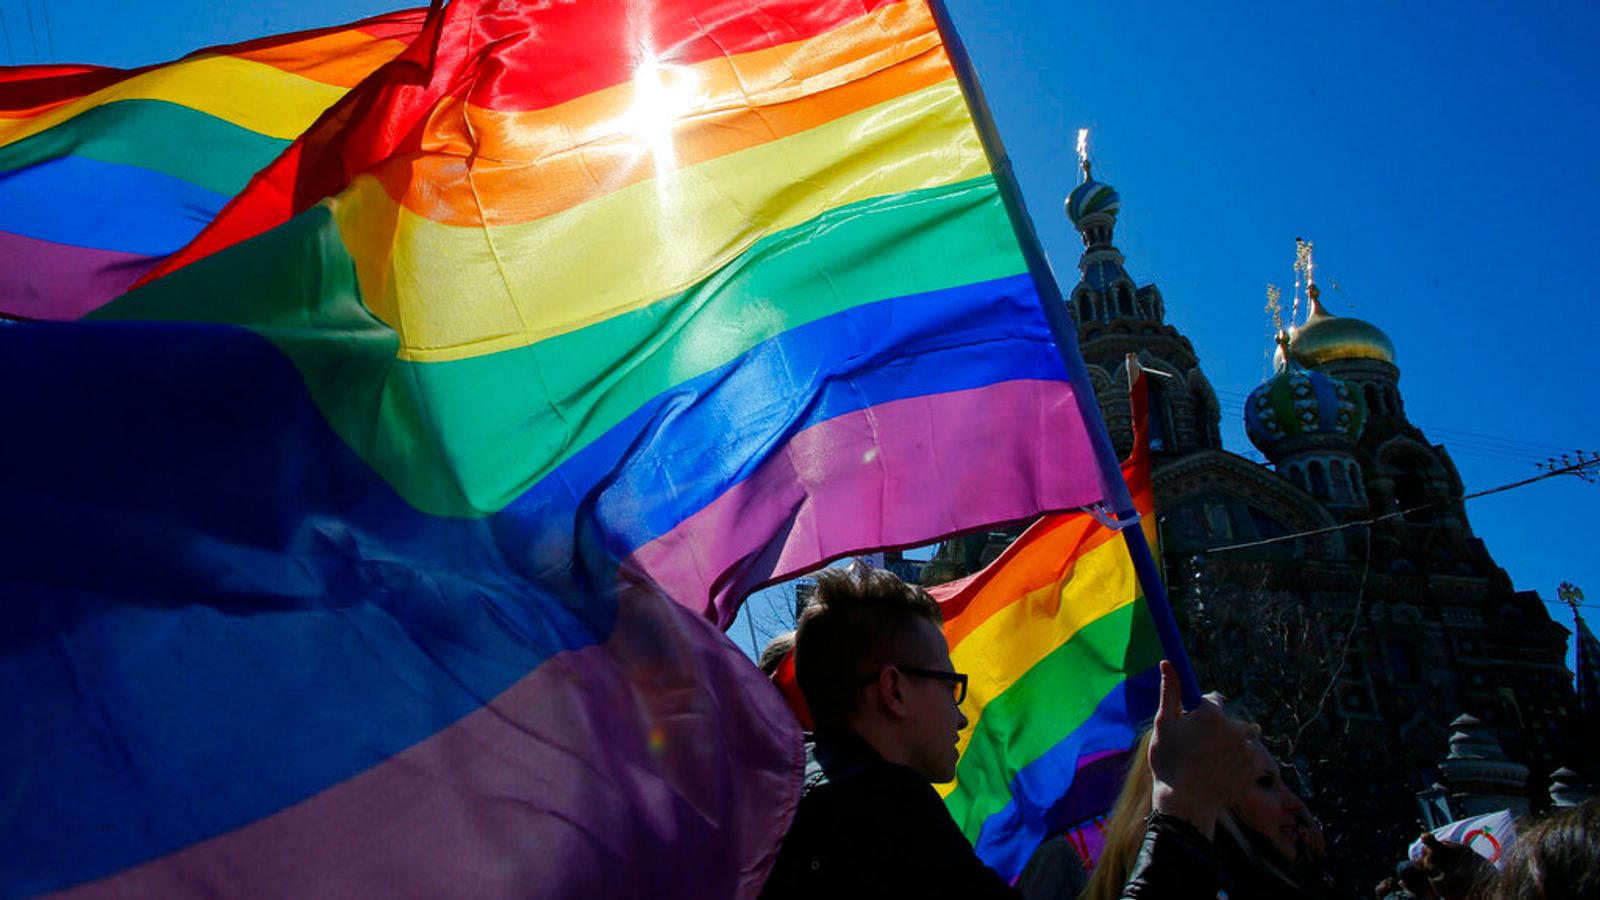 Russia tightens LGBTQ+ law in clampdown on beleaguered community